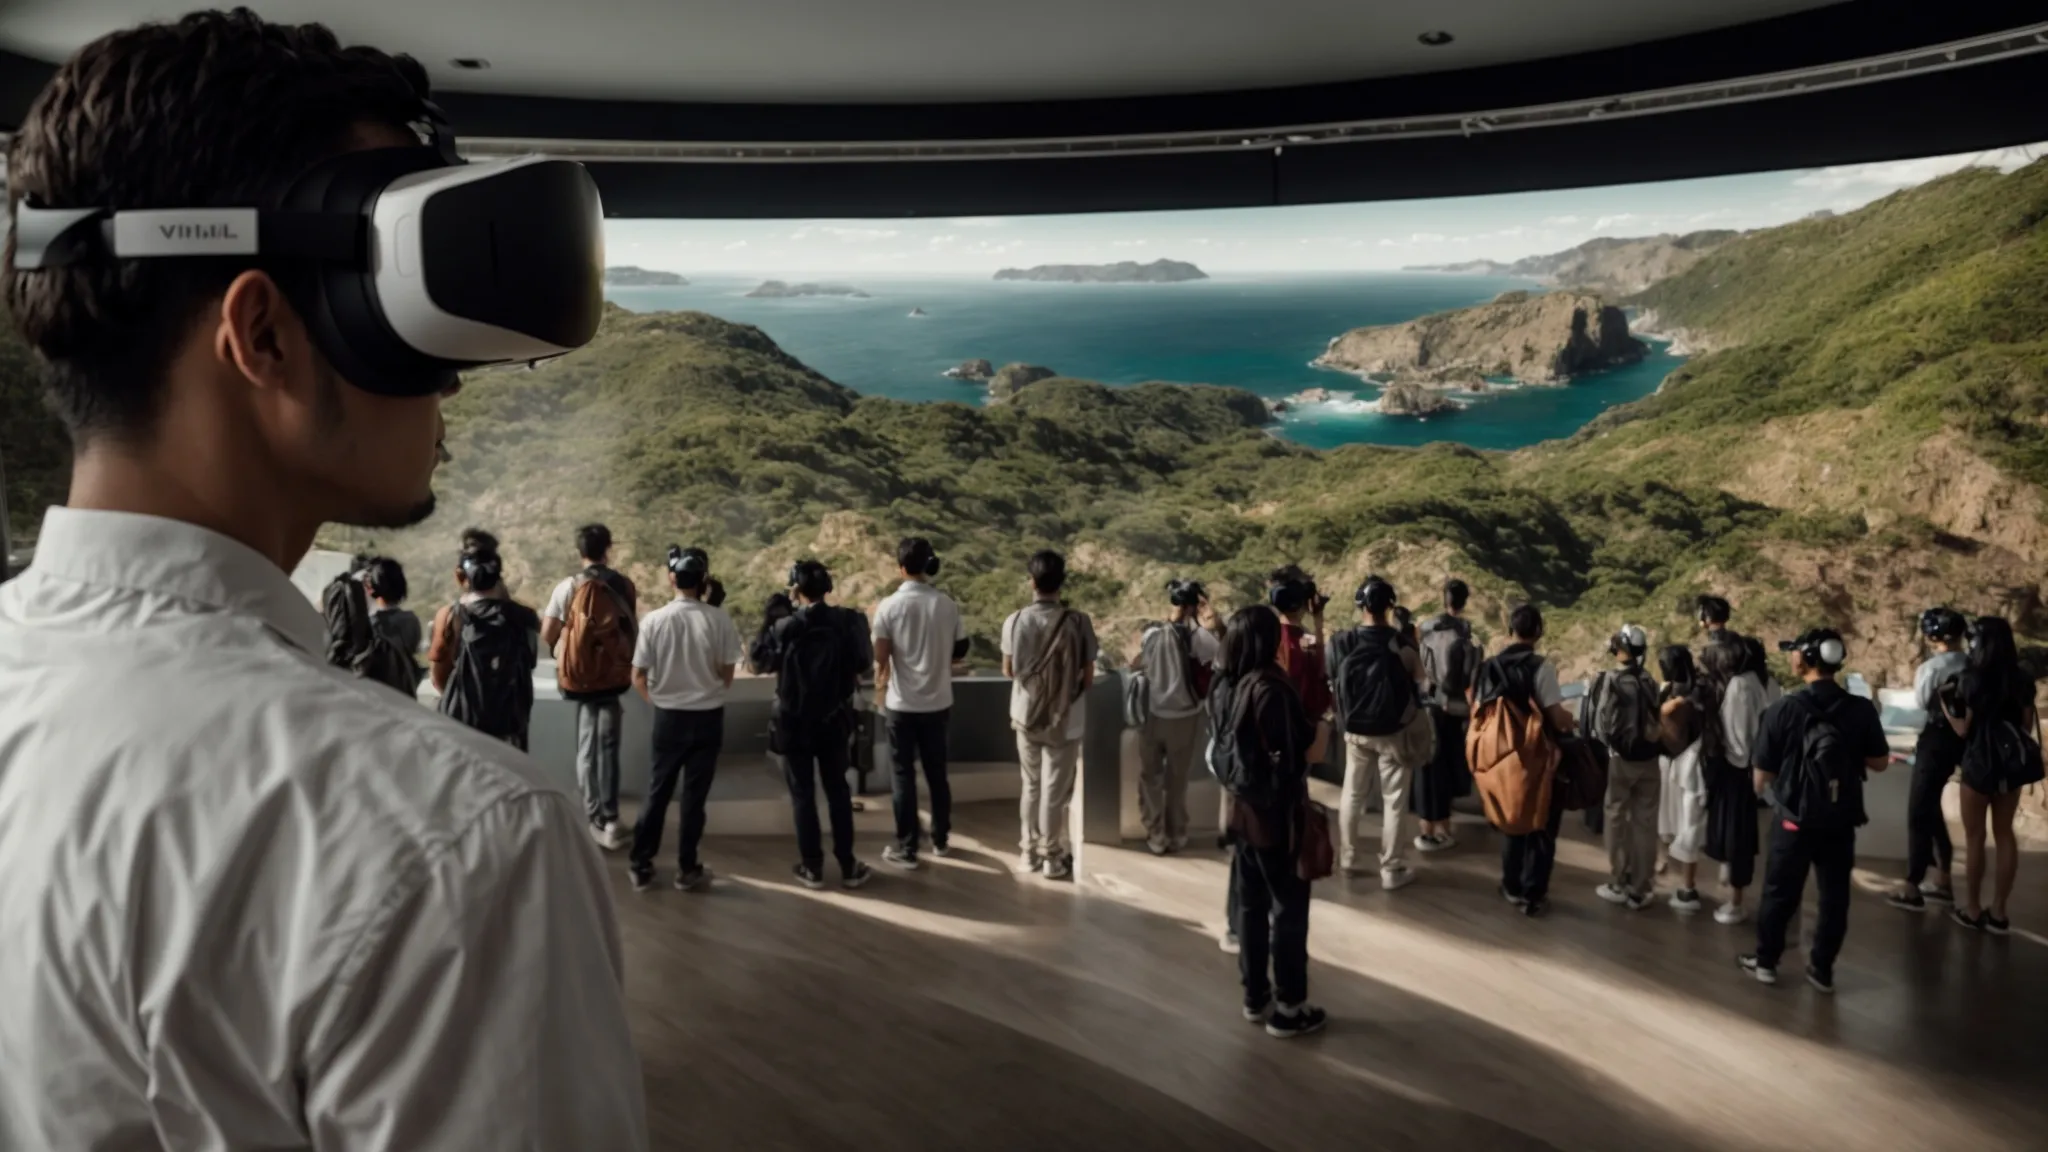 a person wearing a vr headset stands before a large screen displaying a virtual world, surrounded by intrigued onlookers.